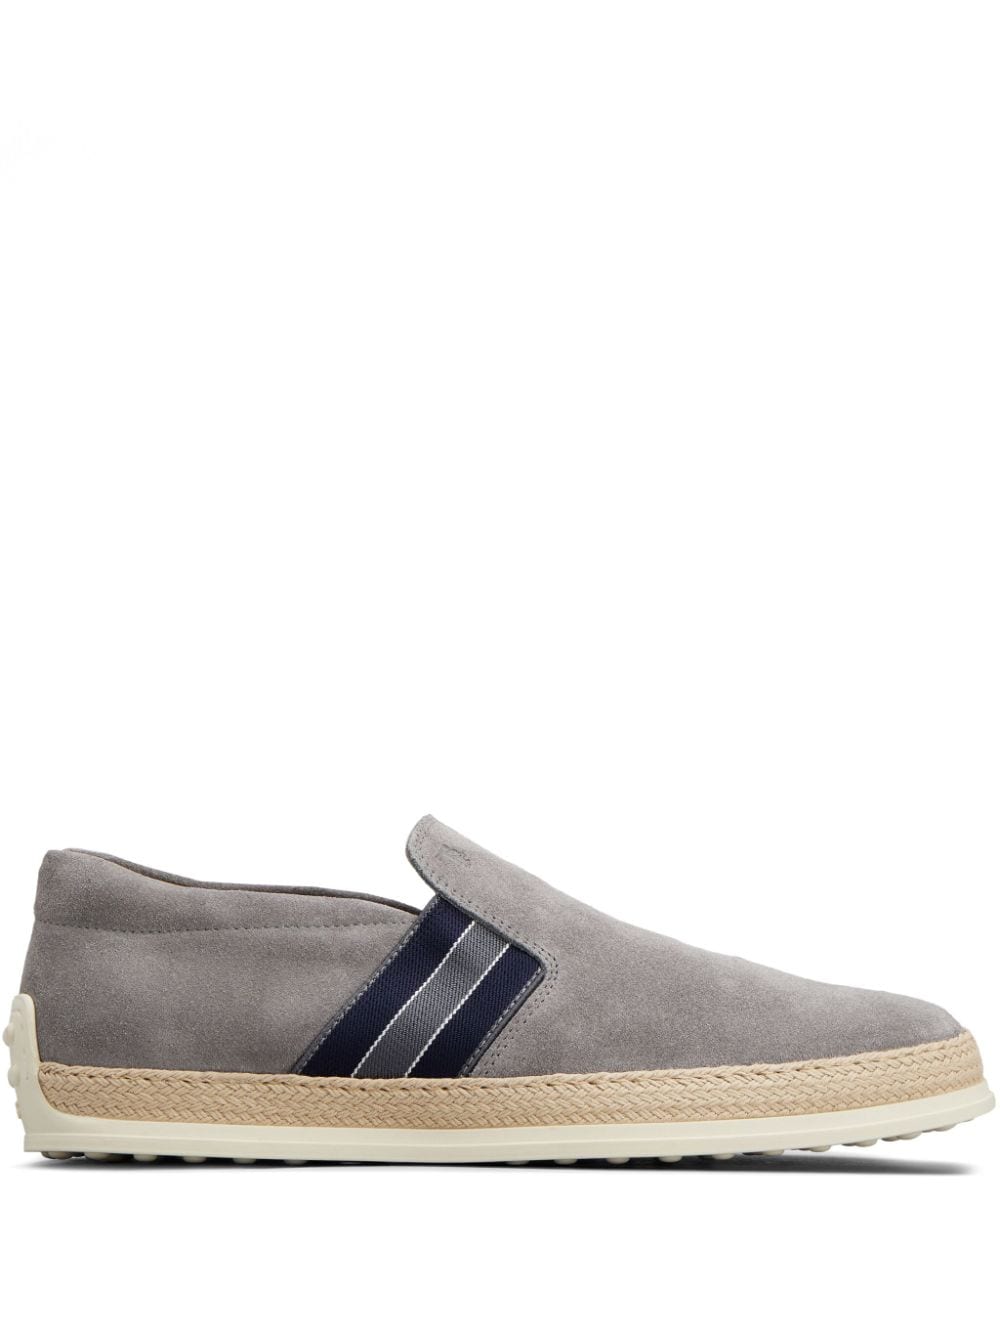 Tod's Gommino suede loafers - Grey von Tod's